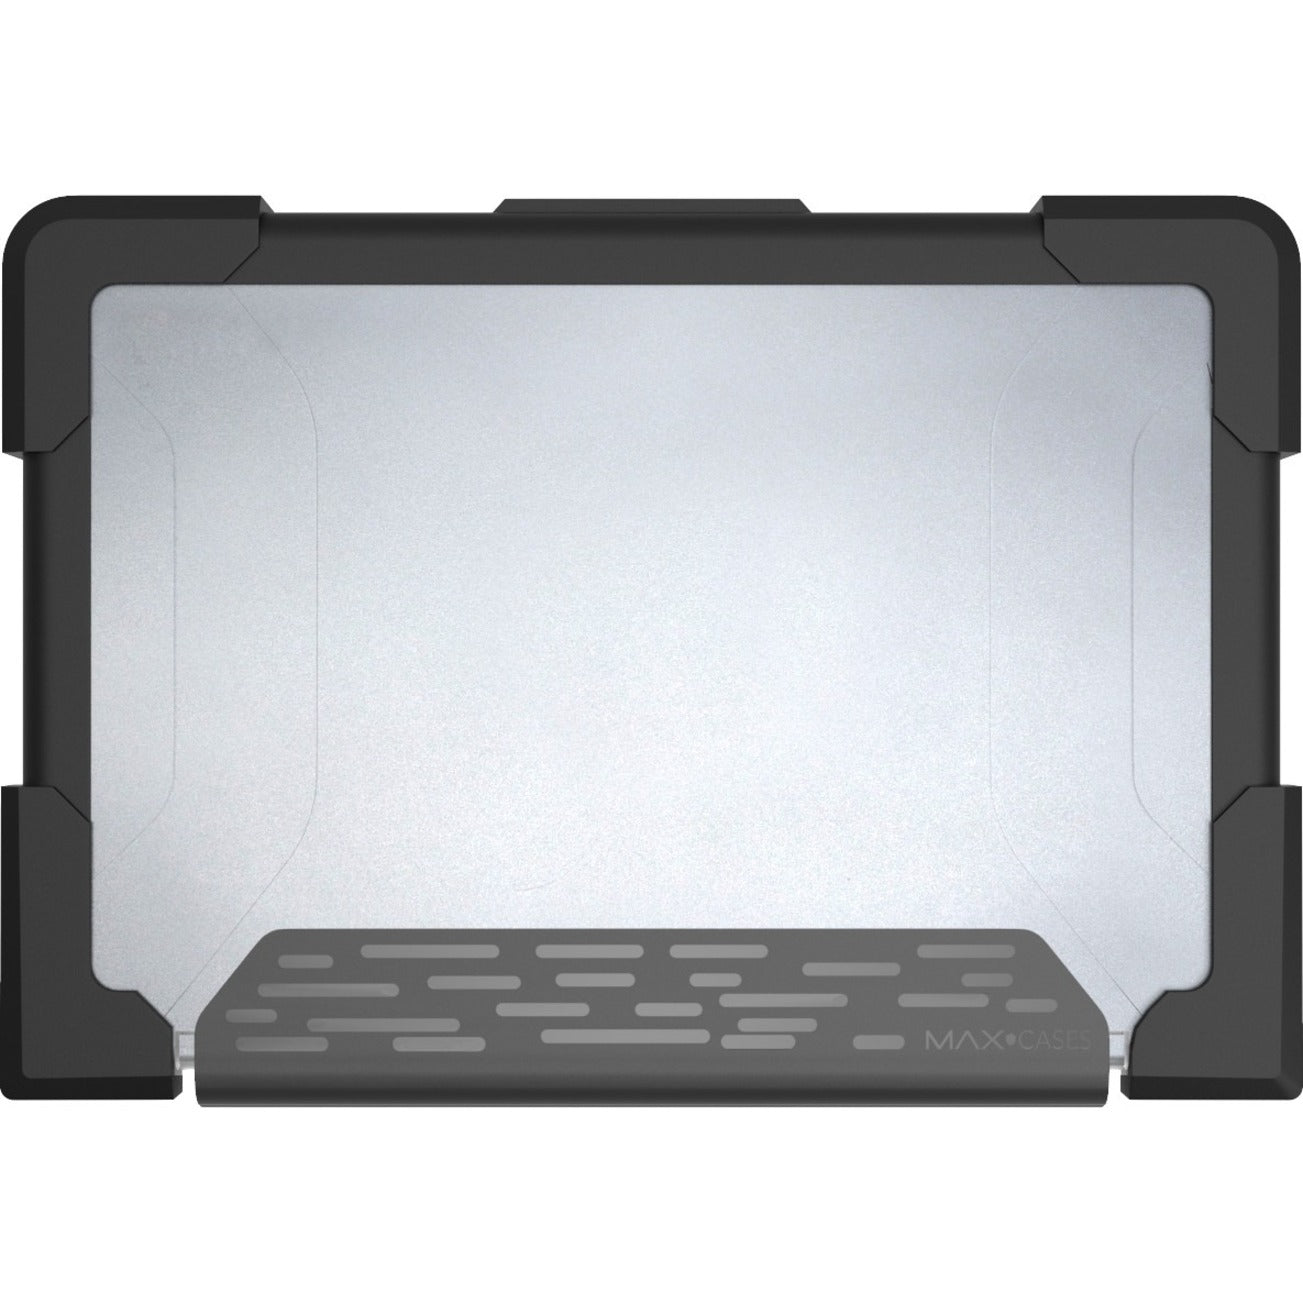 MAXCases HP-ESS-G5EE-14-BLK Extreme Shell-S for HP G5 EE Chromebook Clamshell 14" (Black), Drop Resistant, Scratch Resistant, Impact Resistant, Damage Resistant, Ding Resistant, Bump Resistant, Anti-slip